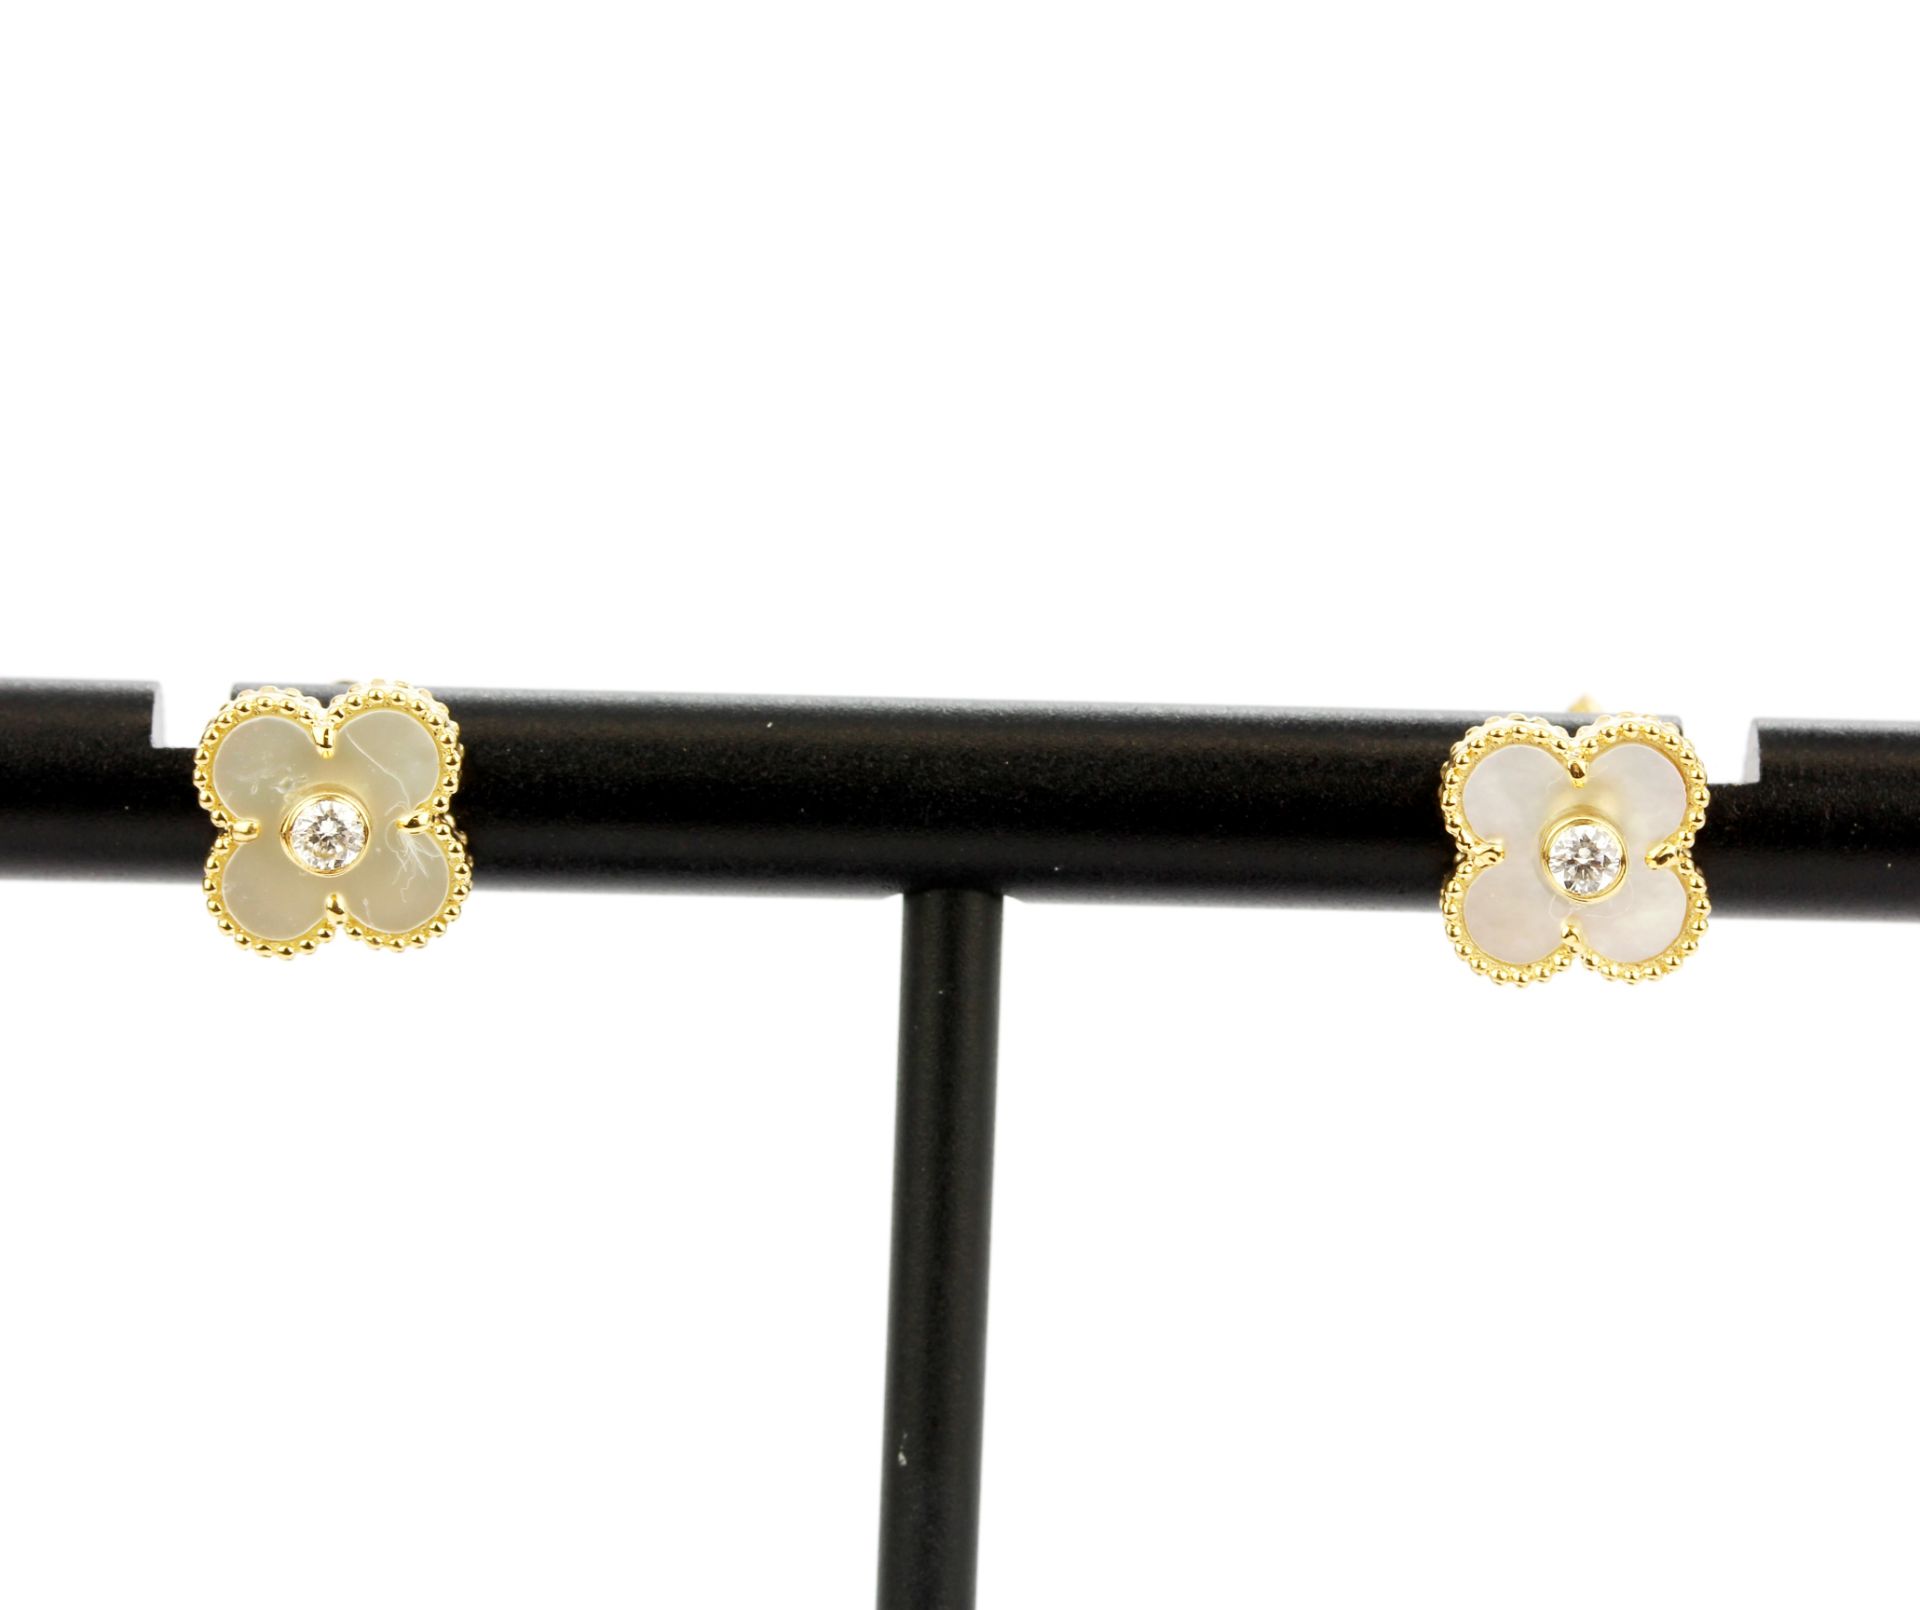 A pair of 18ct yellow gold (stamped 18K) stud earrings set with mother of pearl and a diamond, L. - Image 4 of 4